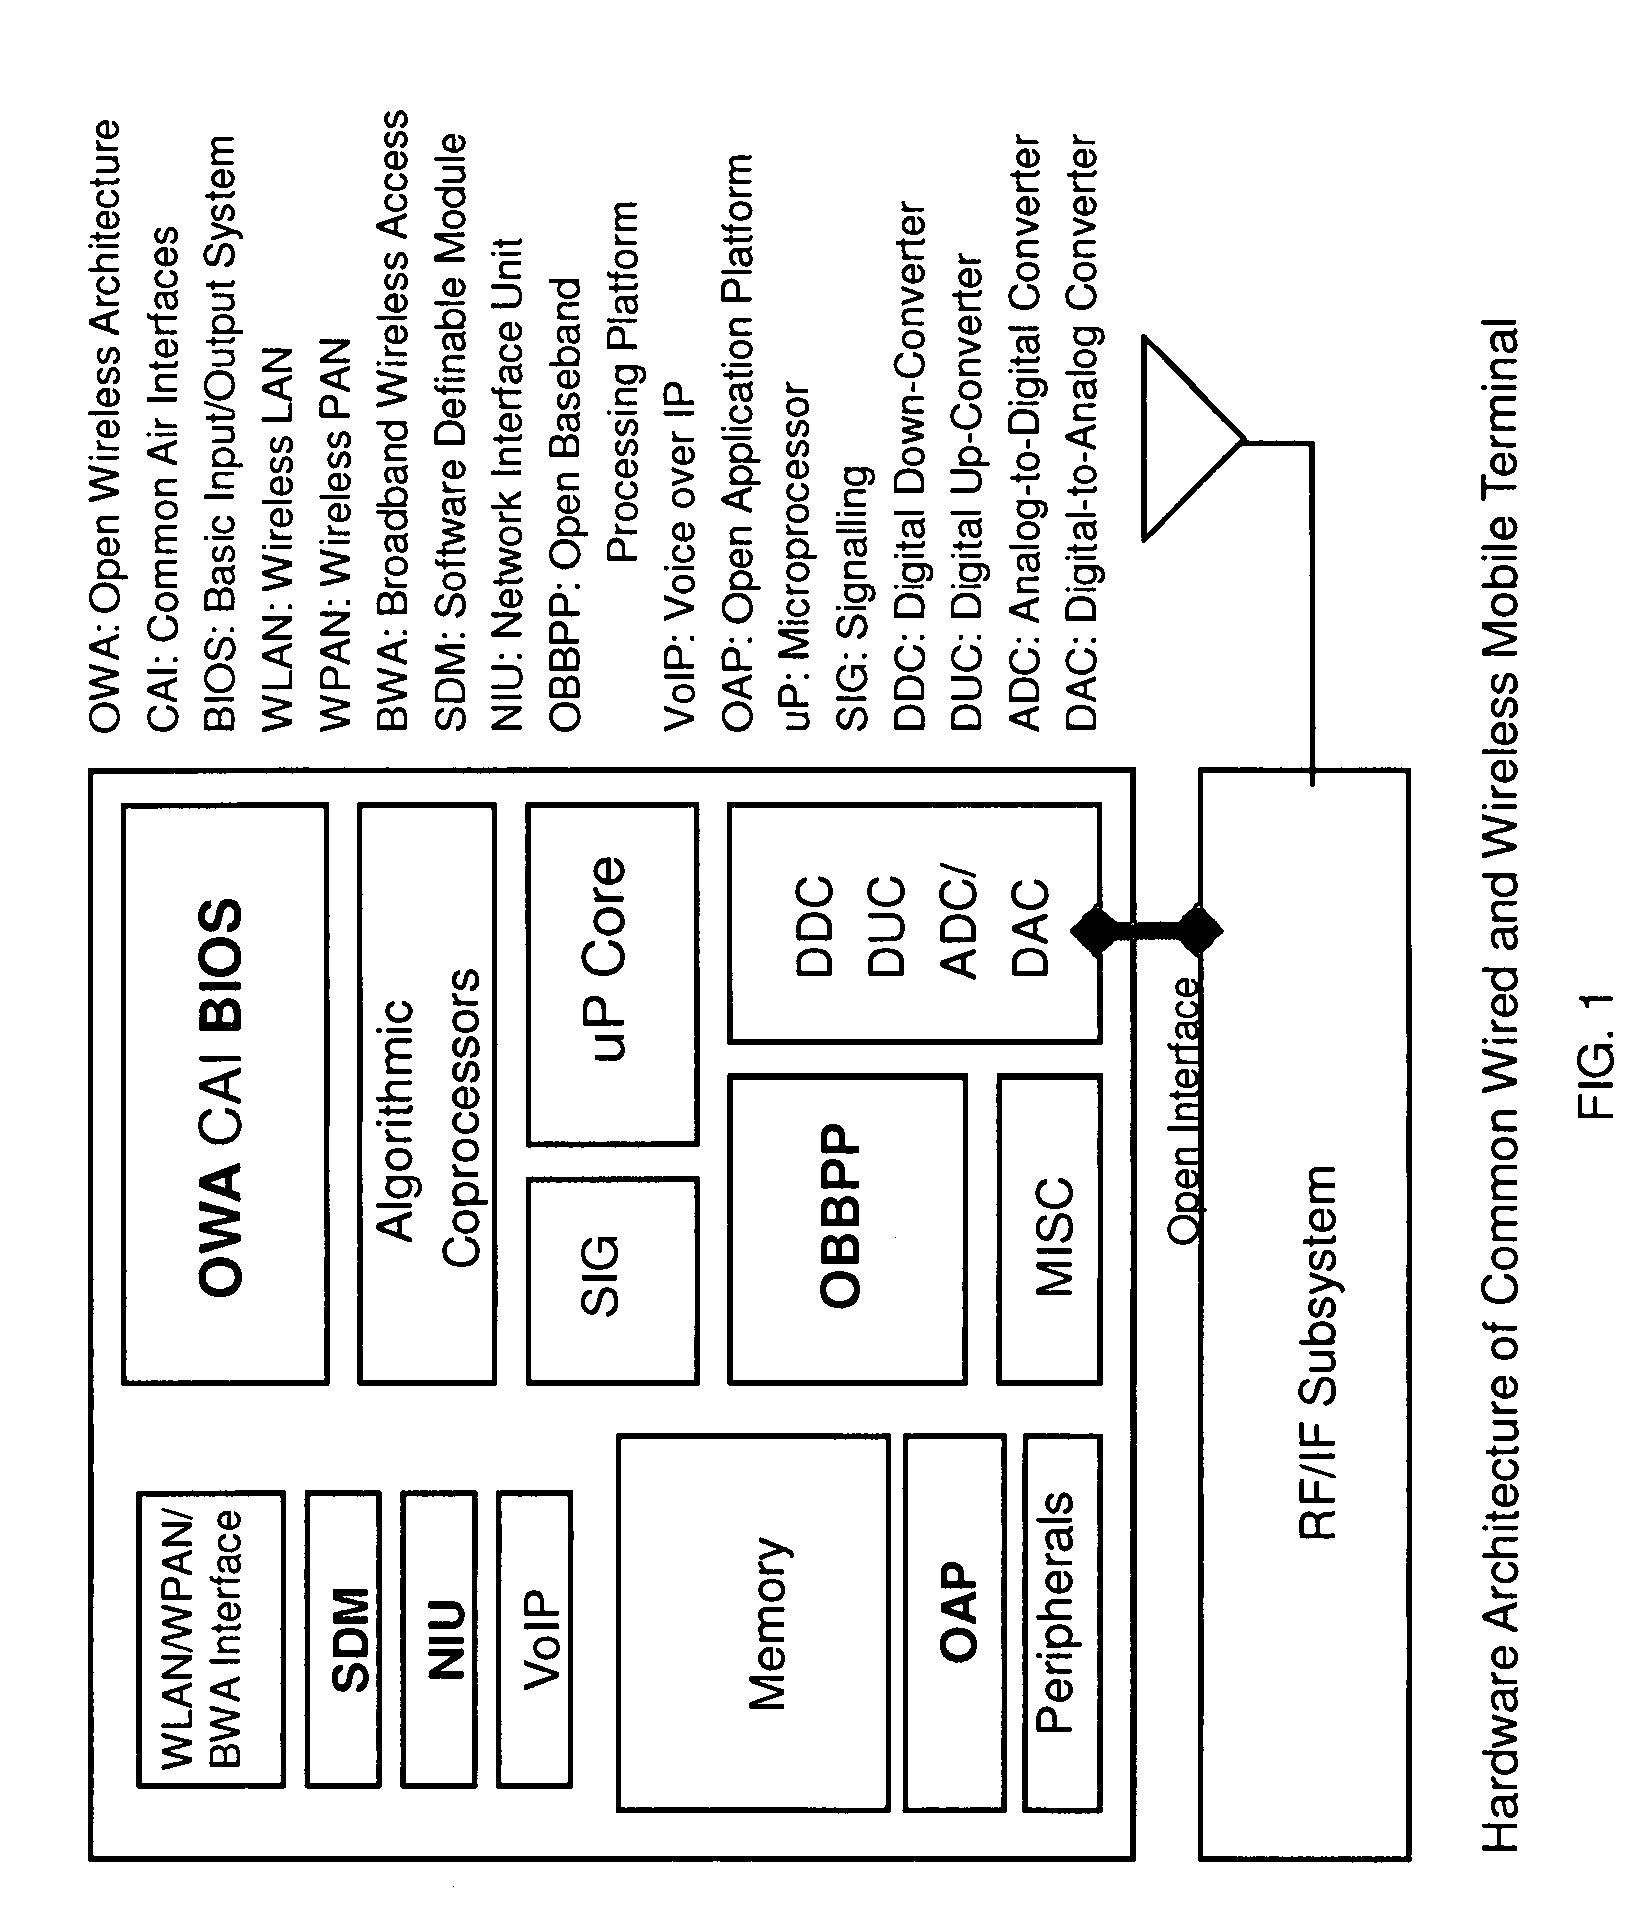 Common communication terminal architecture and method